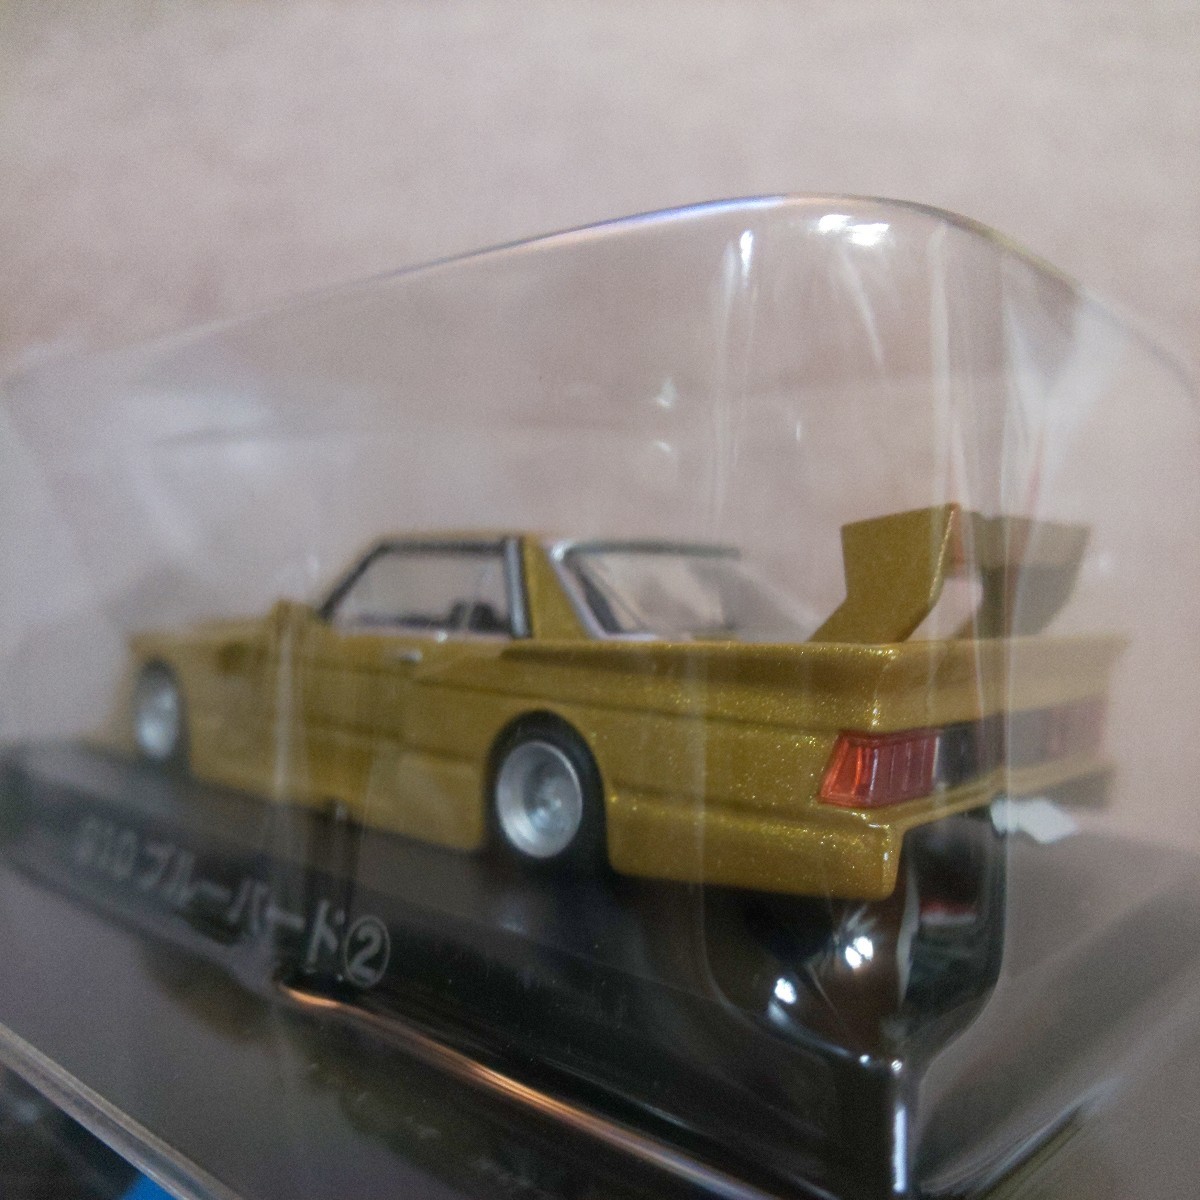 KY910 Aoshima 1/64gla tea n no. 12.910 Bluebird 1983 year ② gold color Shadow manner Gold old car association high speed have lead turbo Silhouette shadow 